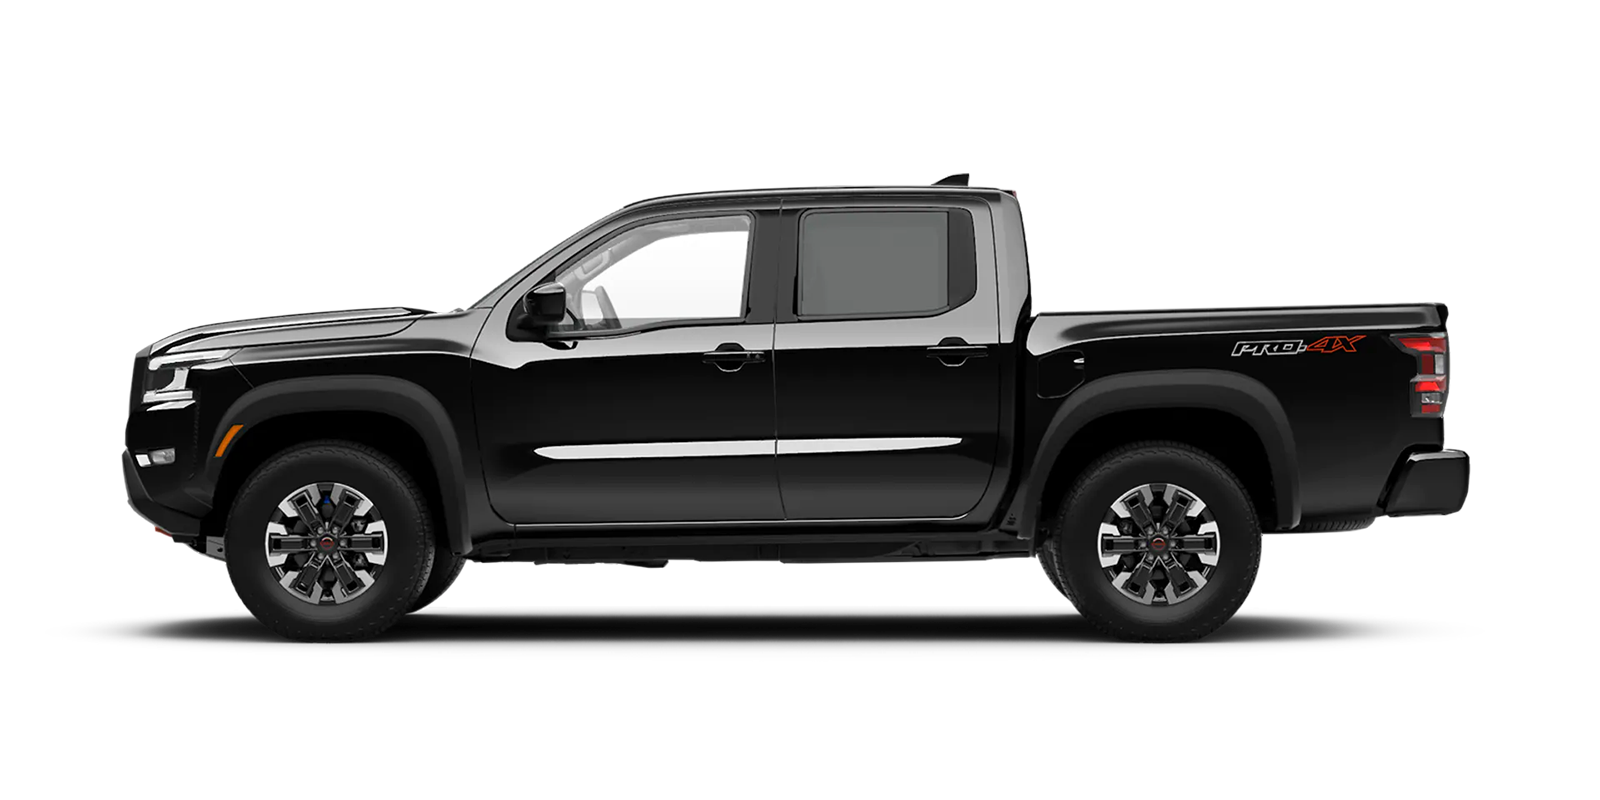 2022 Frontier Crew Cab Pro-4X 4x4 in Super Black | Cherokee County Nissan in Holly Springs GA